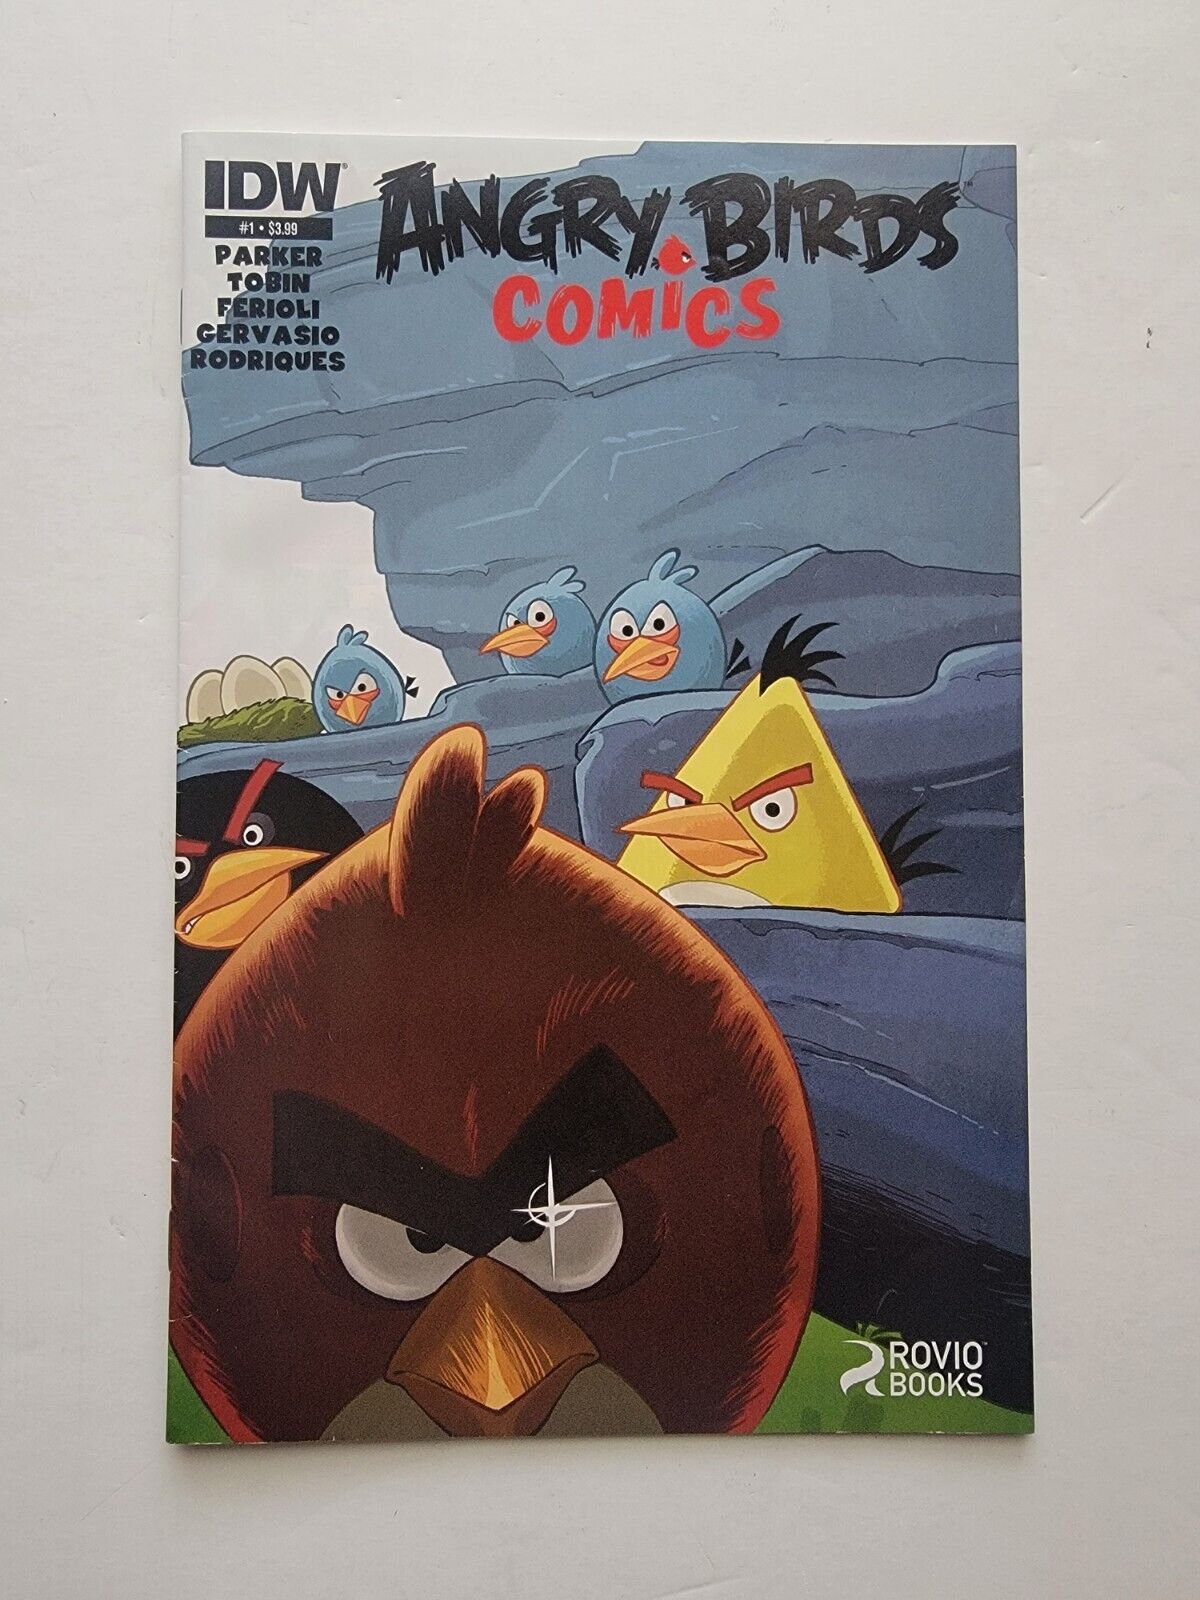 ANGRY BIRDS COMICS #1, COVER by PACO RODRIGUES  (2014)